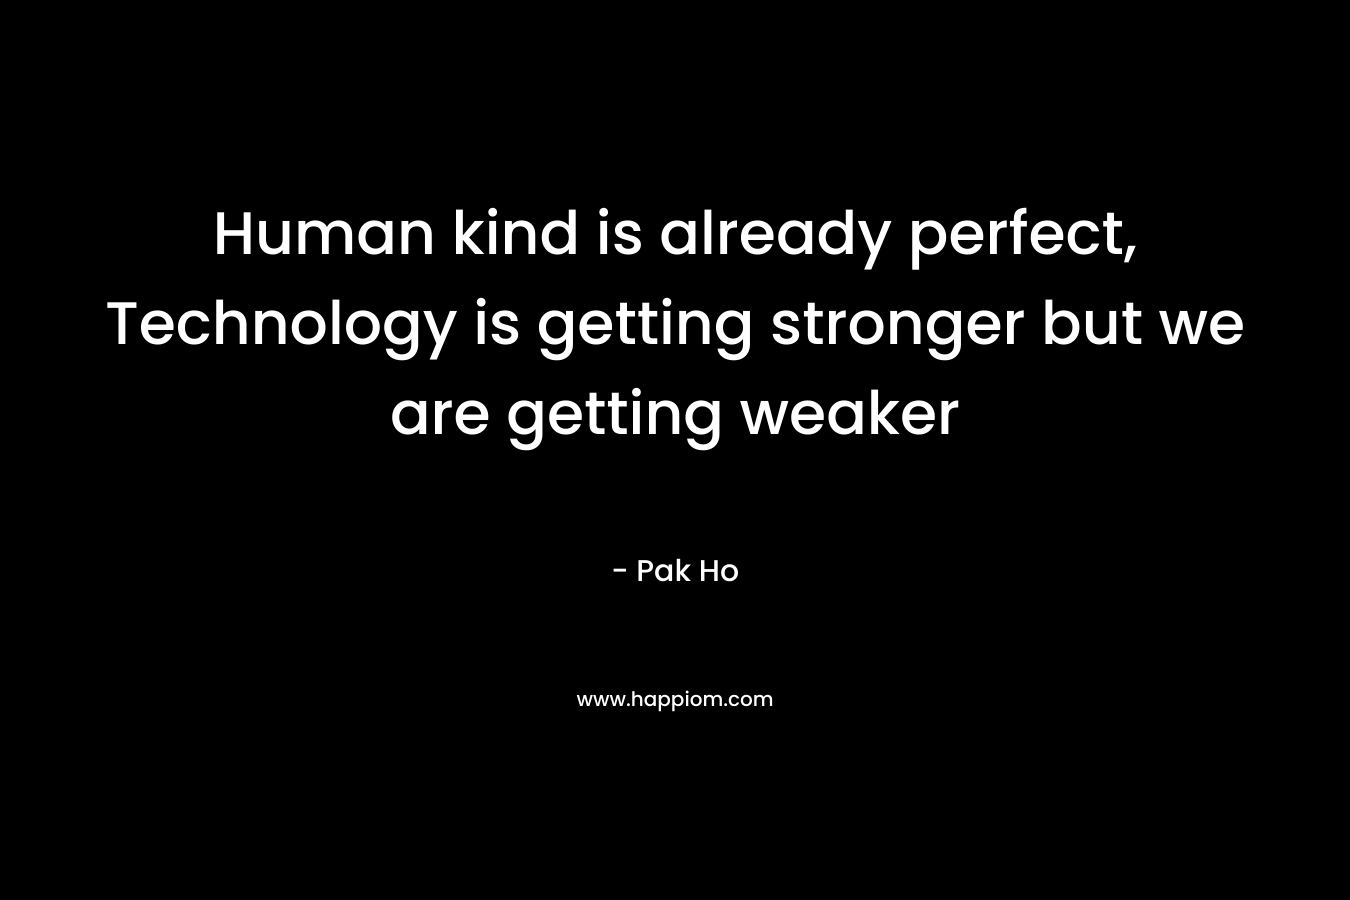 Human kind is already perfect, Technology is getting stronger but we are getting weaker – Pak Ho